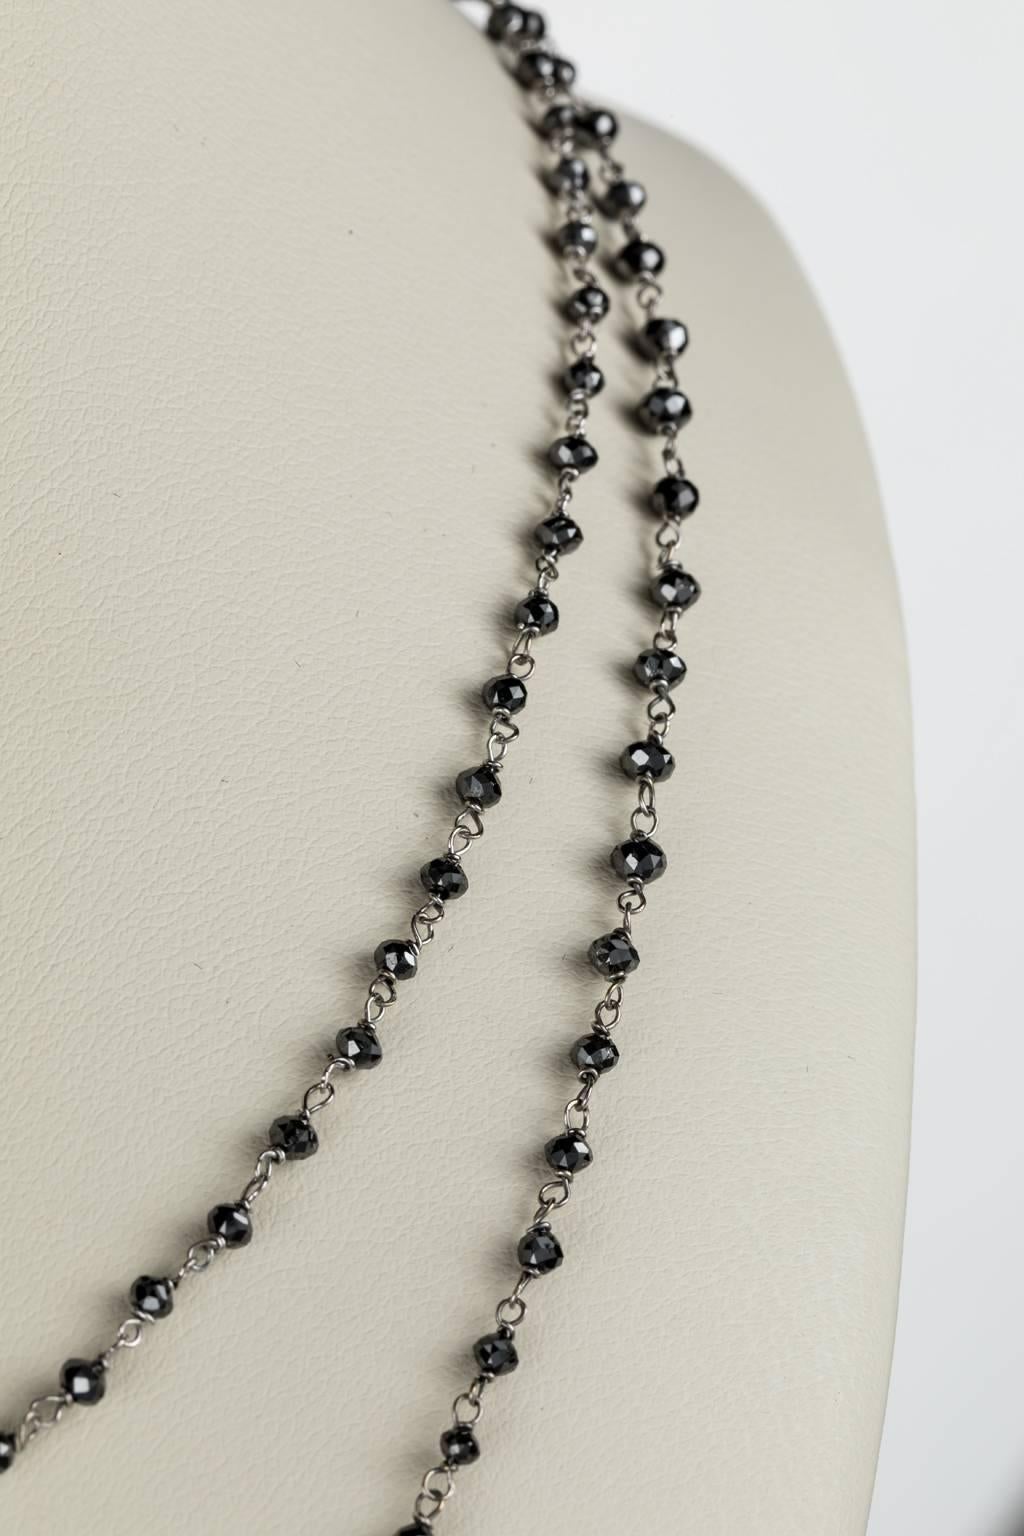 Black Diamonds have a magical look to them. Since diamond is the hardest substance known to man these gems can take an extremely high polish so they have so much sparkle and life. This handmade black diamond necklace features 19.22cts of faceted